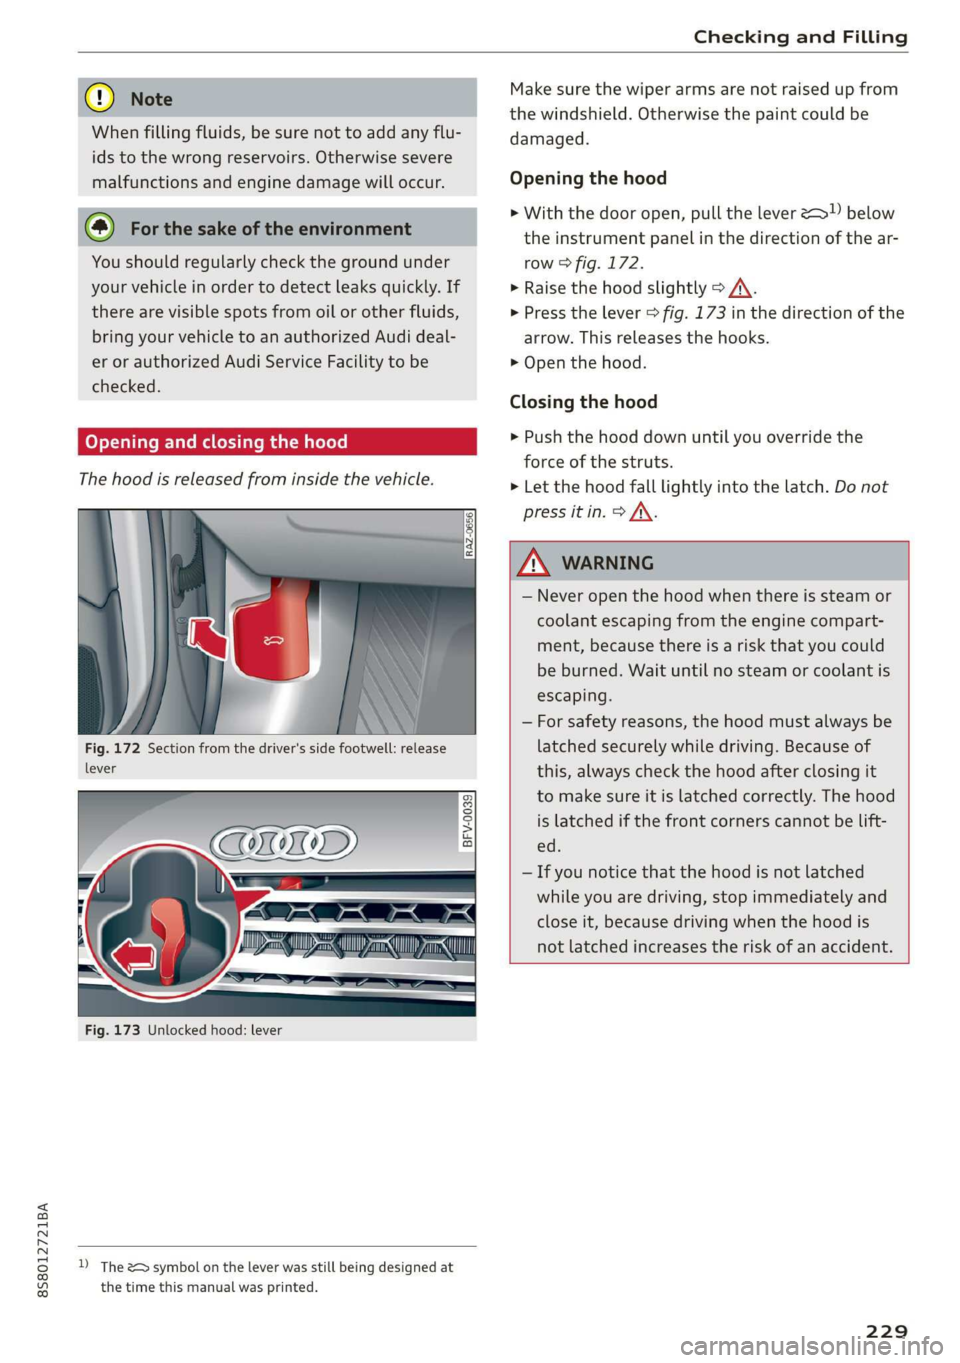 AUDI TT ROADSTER 2019  Owners Manual 8S58012721BA 
Checking and Filling 
  
® Note 
When filling fluids, be sure not to add any flu- 
ids  to the wrong reservoirs. Otherwise severe 
malfunctions and engine damage will occur. 
@) For the